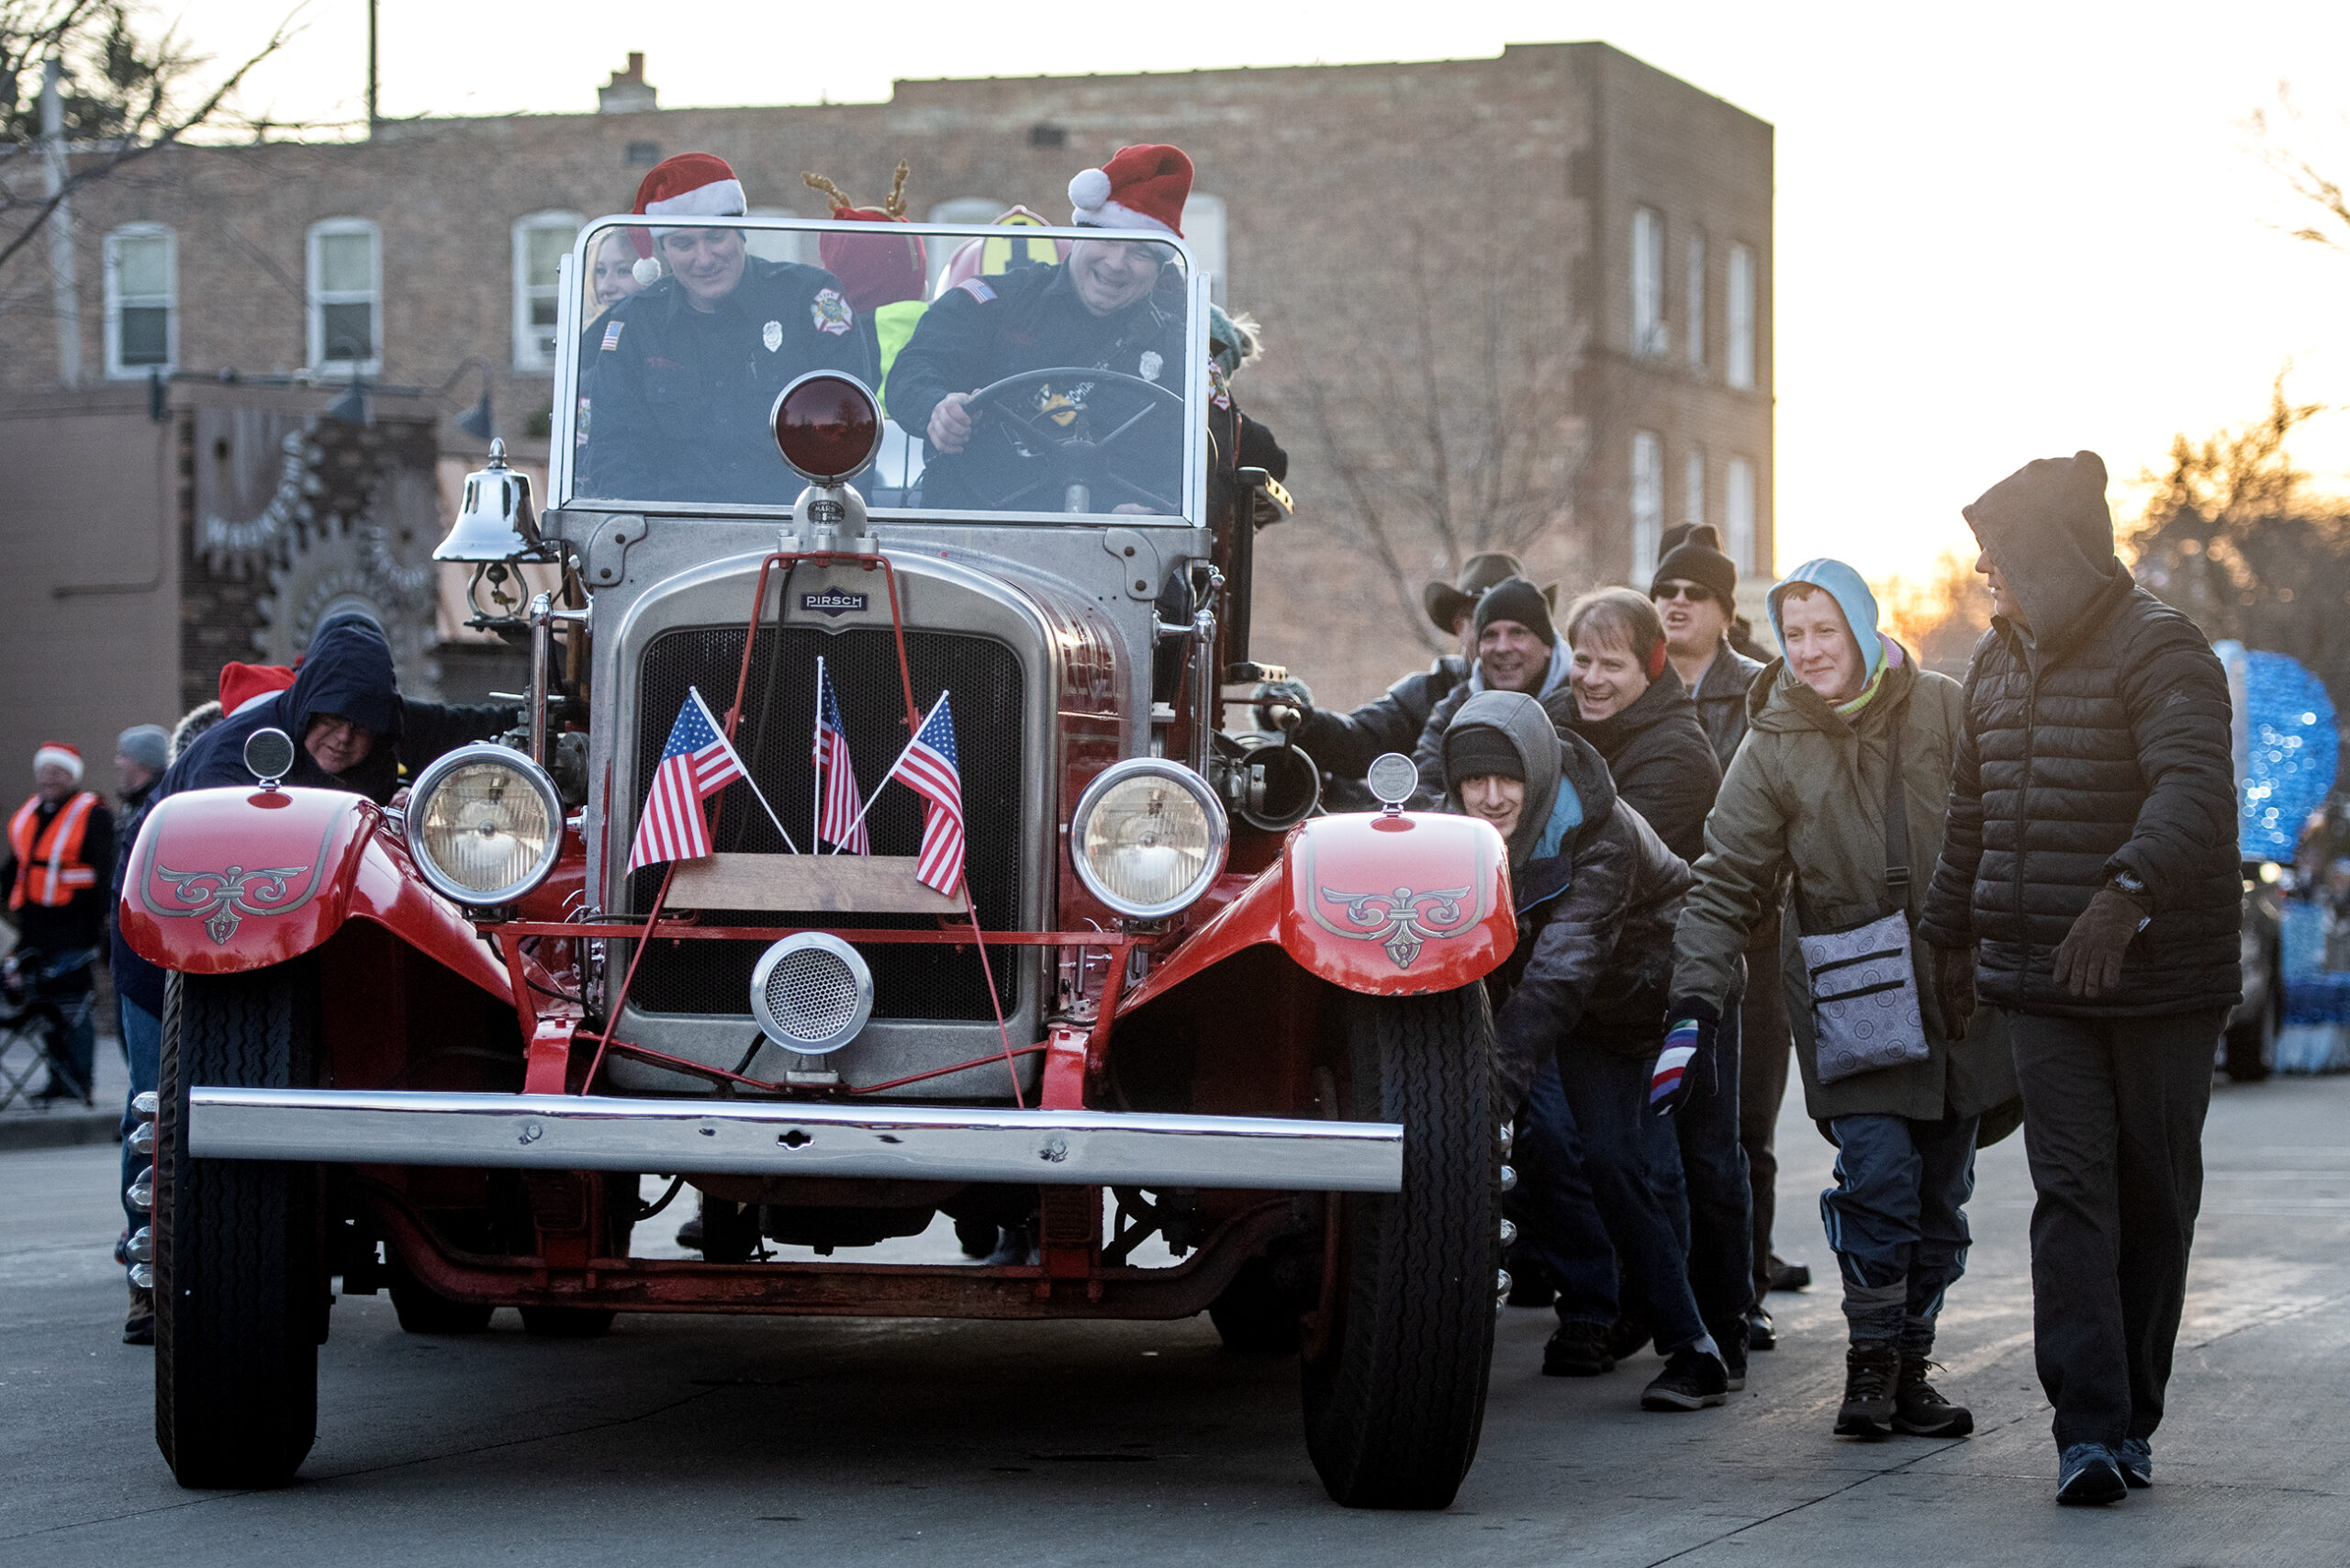 A group of people help to push a vintage style truck in the parade.